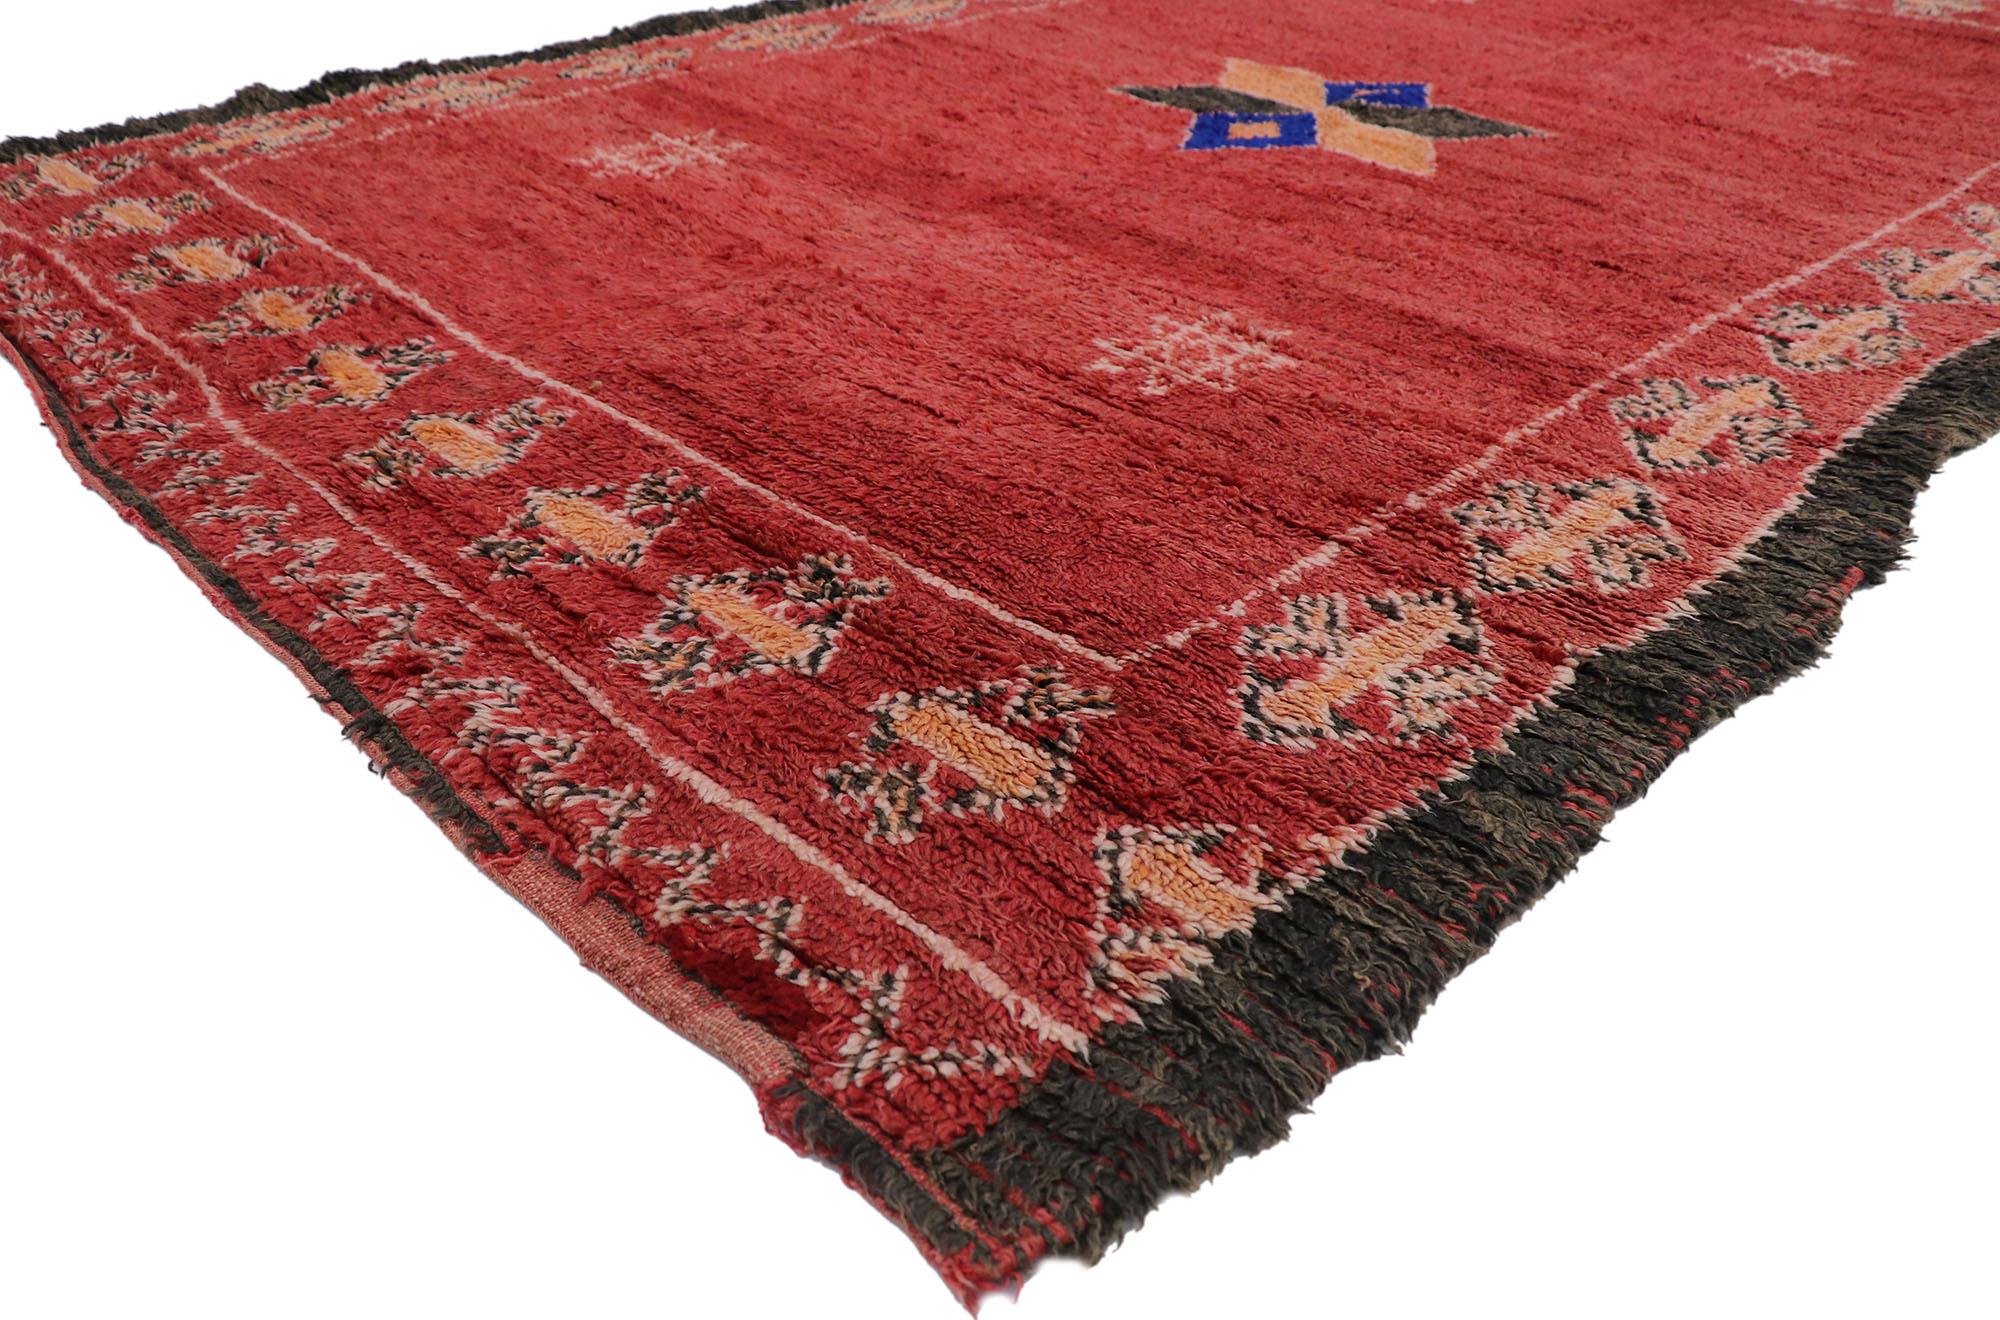 21272 Vintage Red Taznakht Moroccan Rug, 06'06 x 10'05. Taznakht Moroccan rugs are handwoven textiles originating from the Taznakht region in the High Atlas Mountains of Morocco, crafted by Berber women using traditional techniques passed down